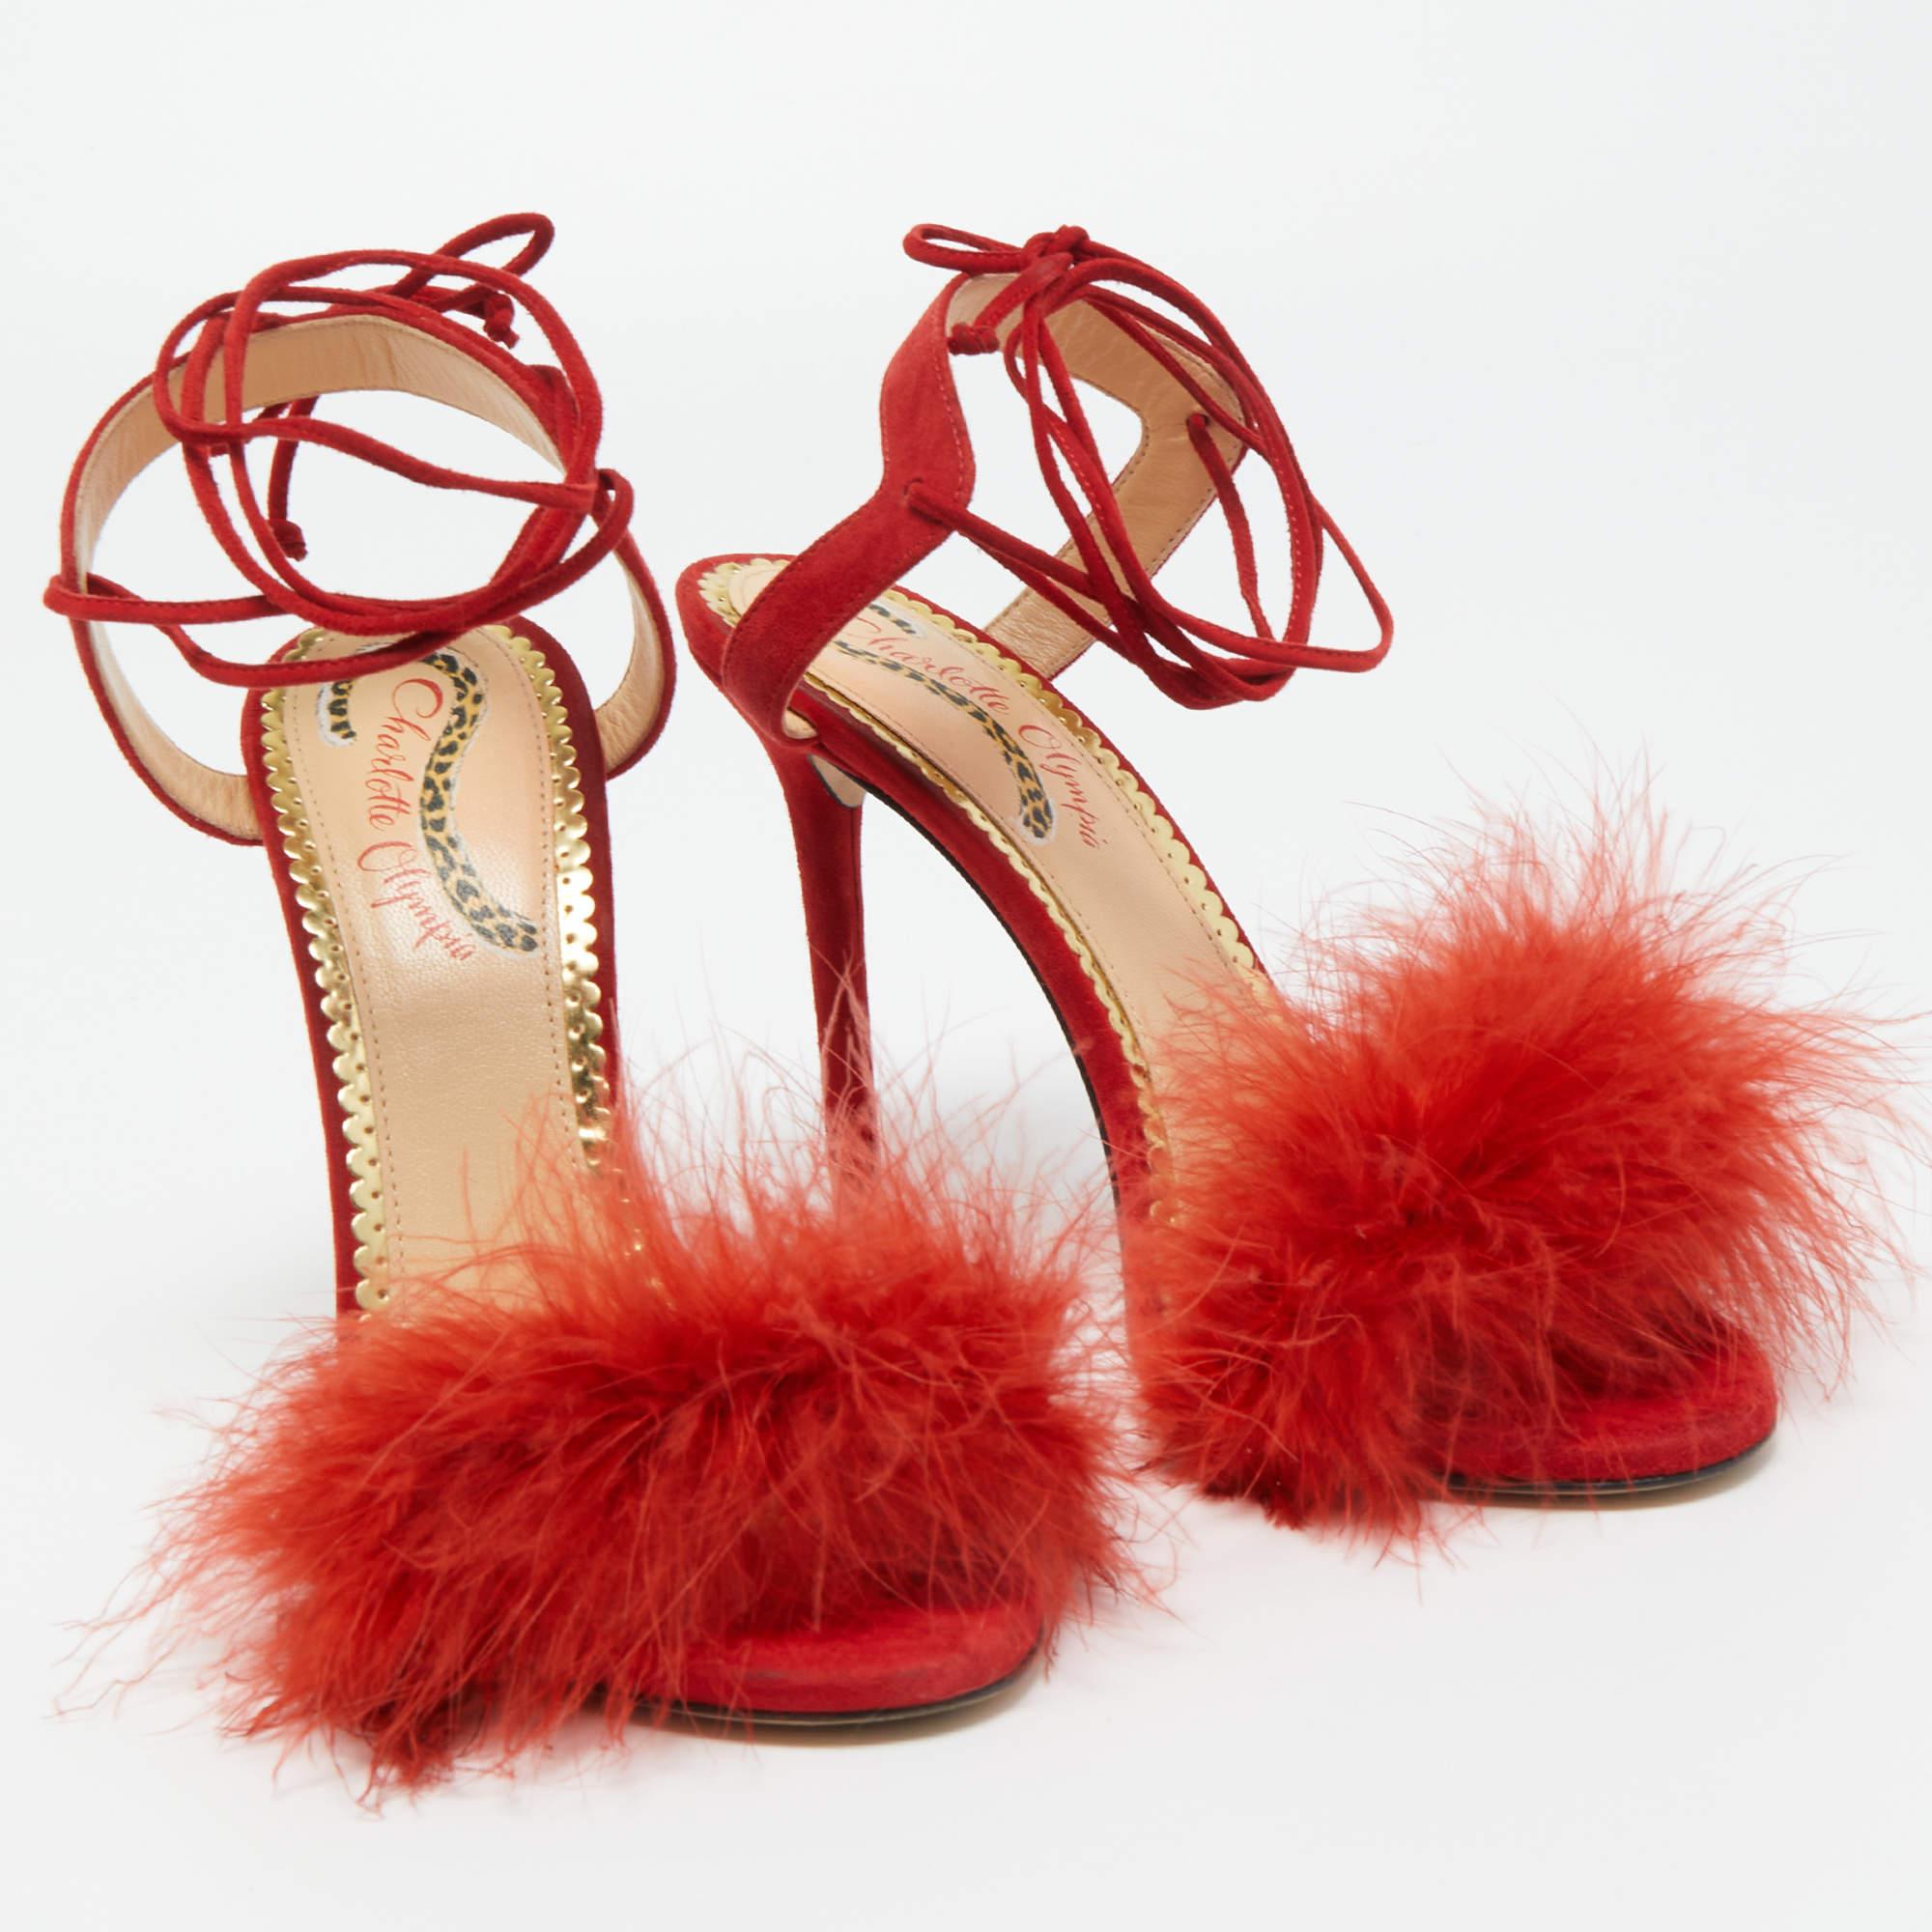 Charlotte Olympia Red Suede and Fur Salsa Ankle Wrap Sandals Size 38.5 1